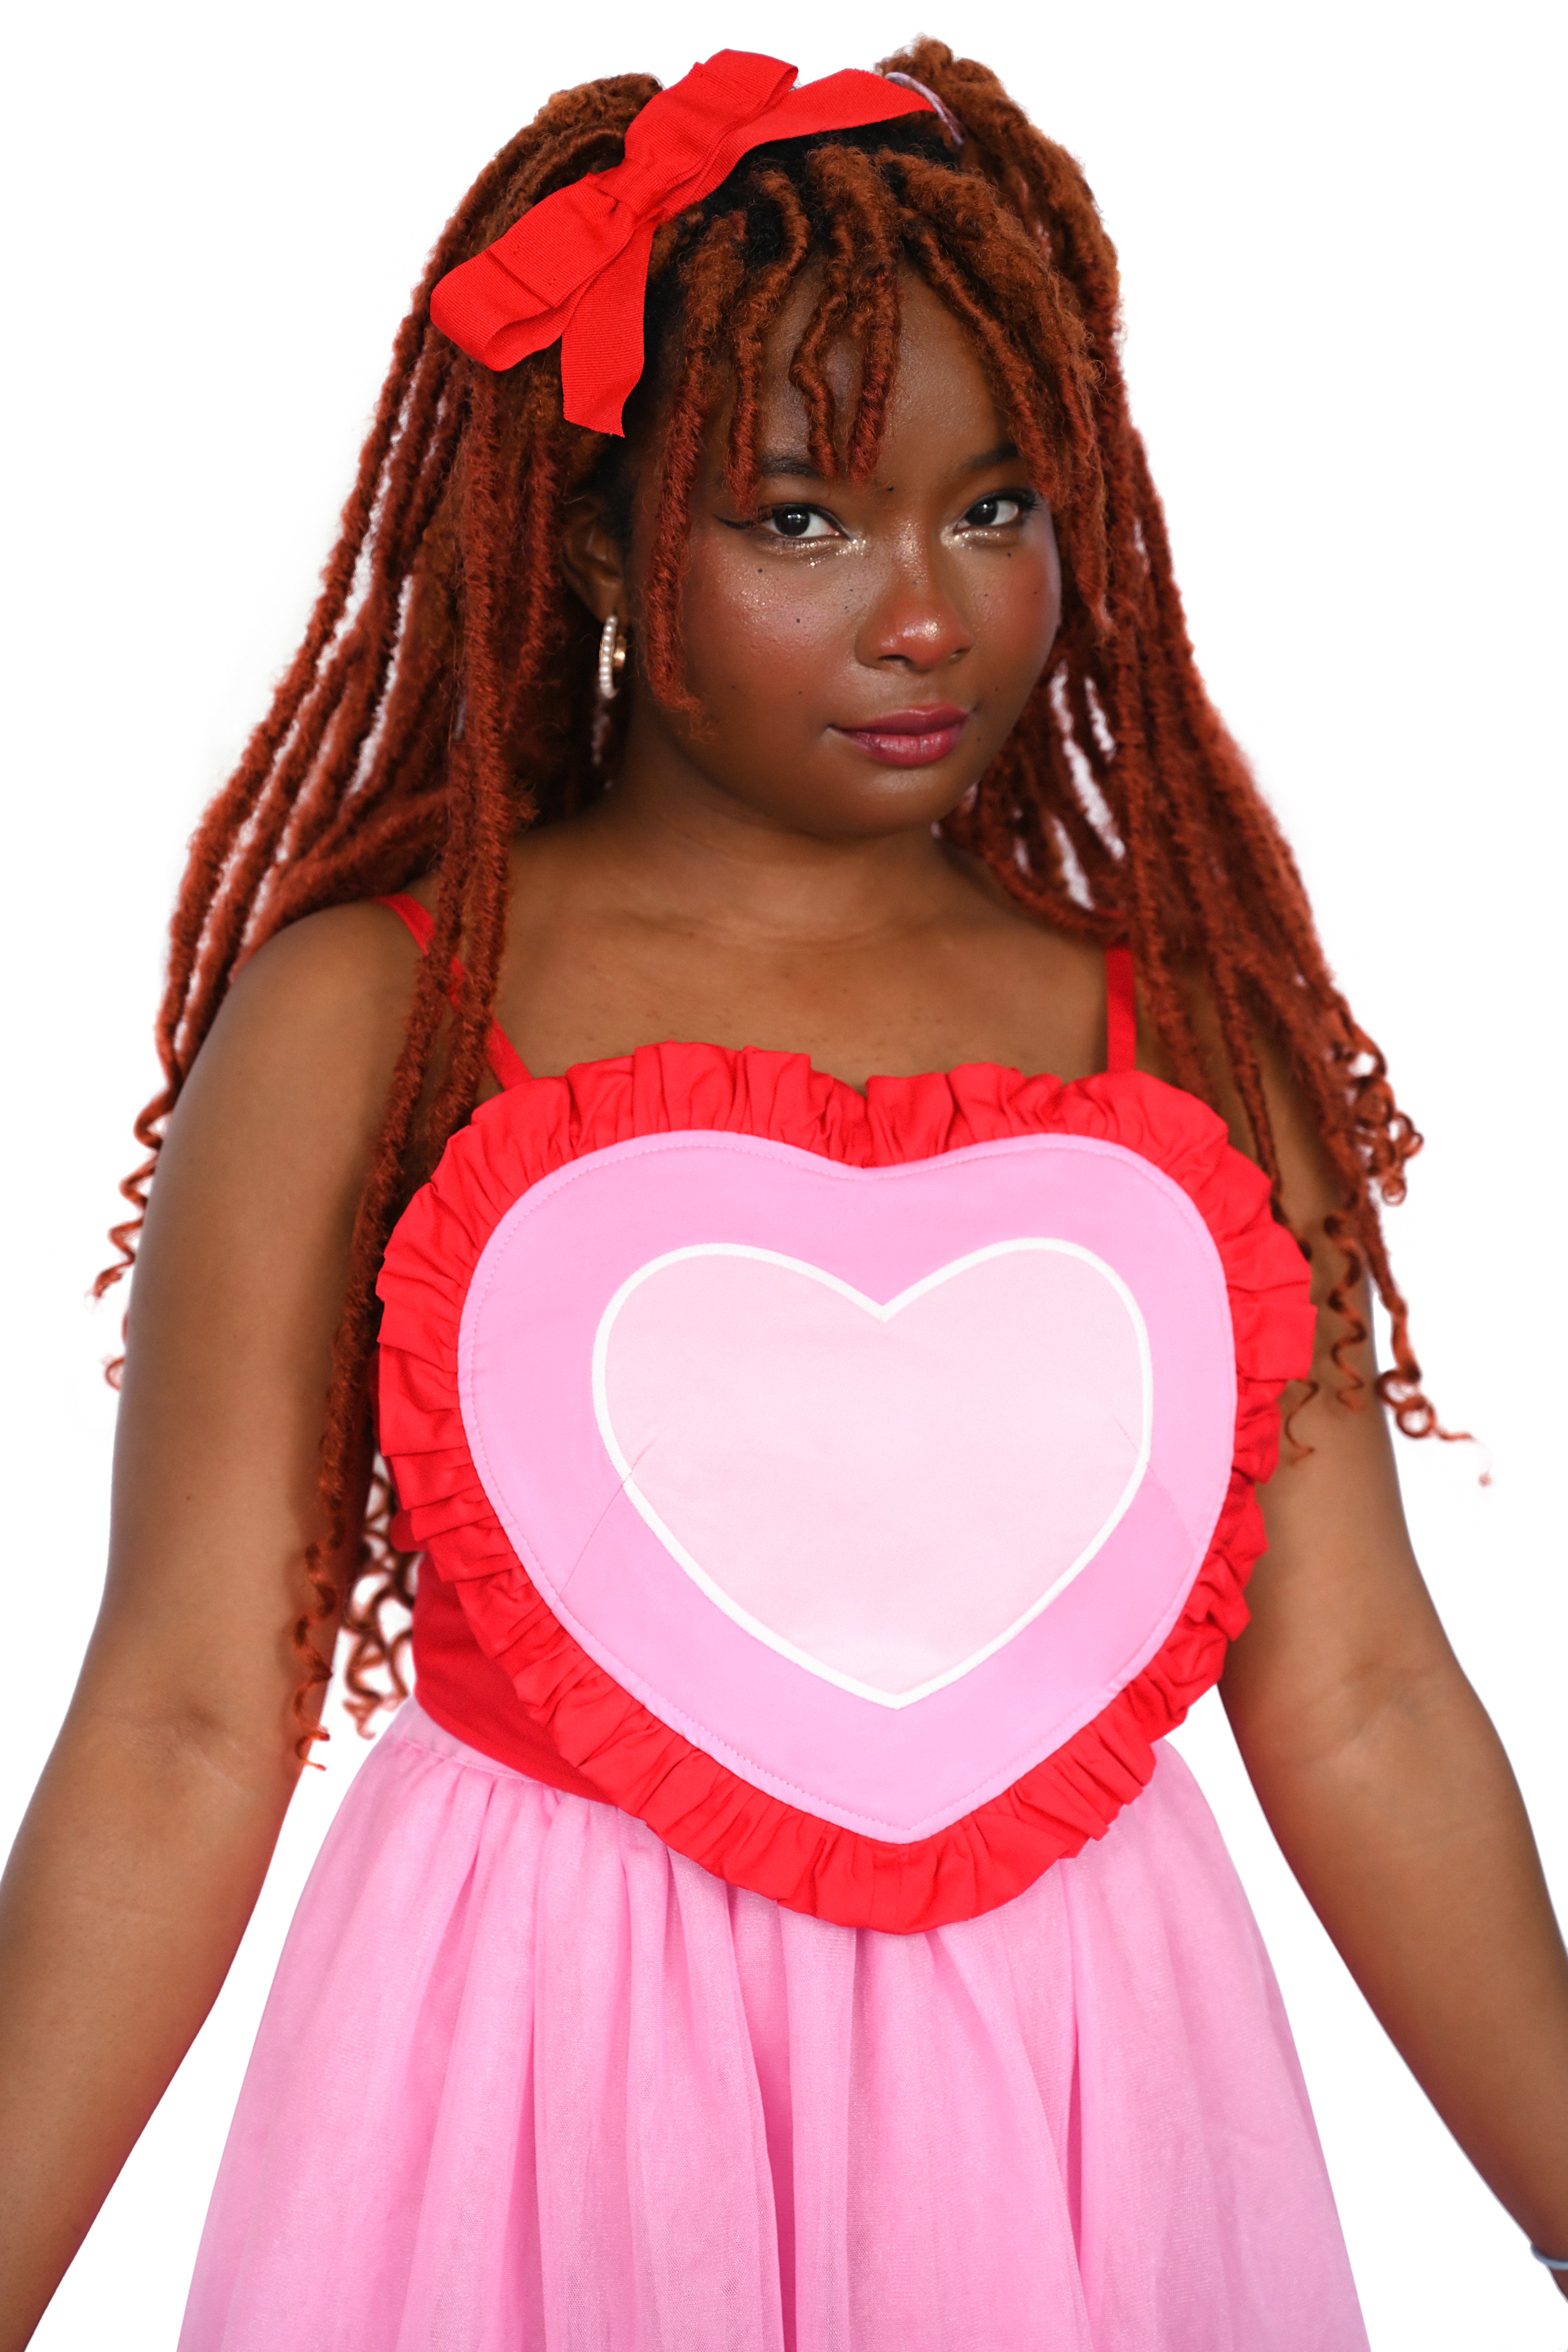 This red, pink, light pink, and white heart shaped corset top has adjustable straps and a lace-up back. The Base color of the corset top is red and a red ruffle surrounds the other colours of the heart.